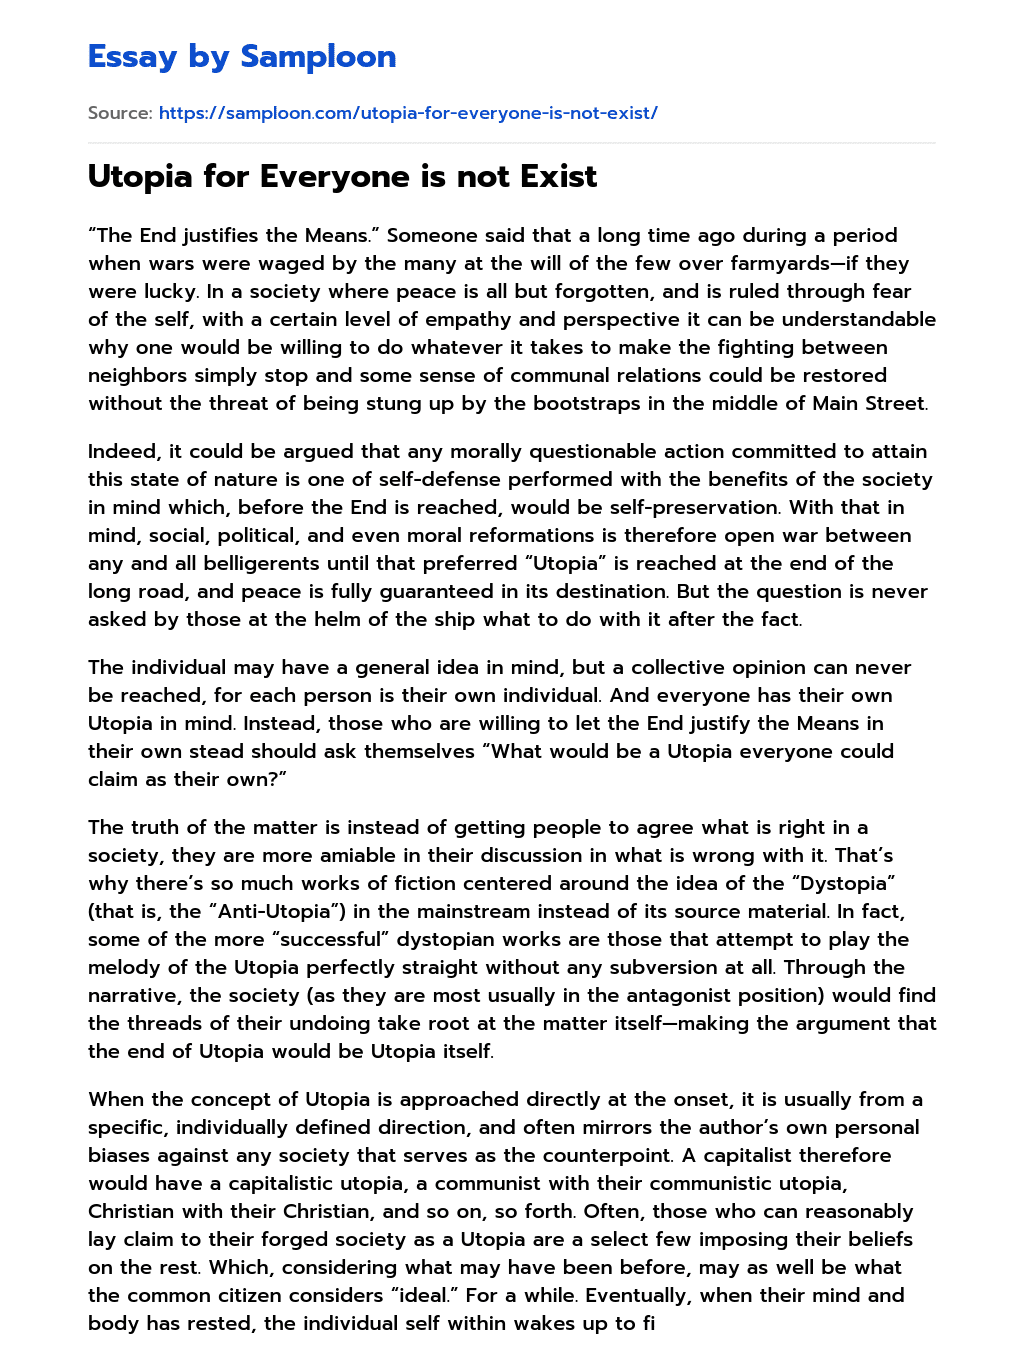 Utopia for Everyone is not Exist essay